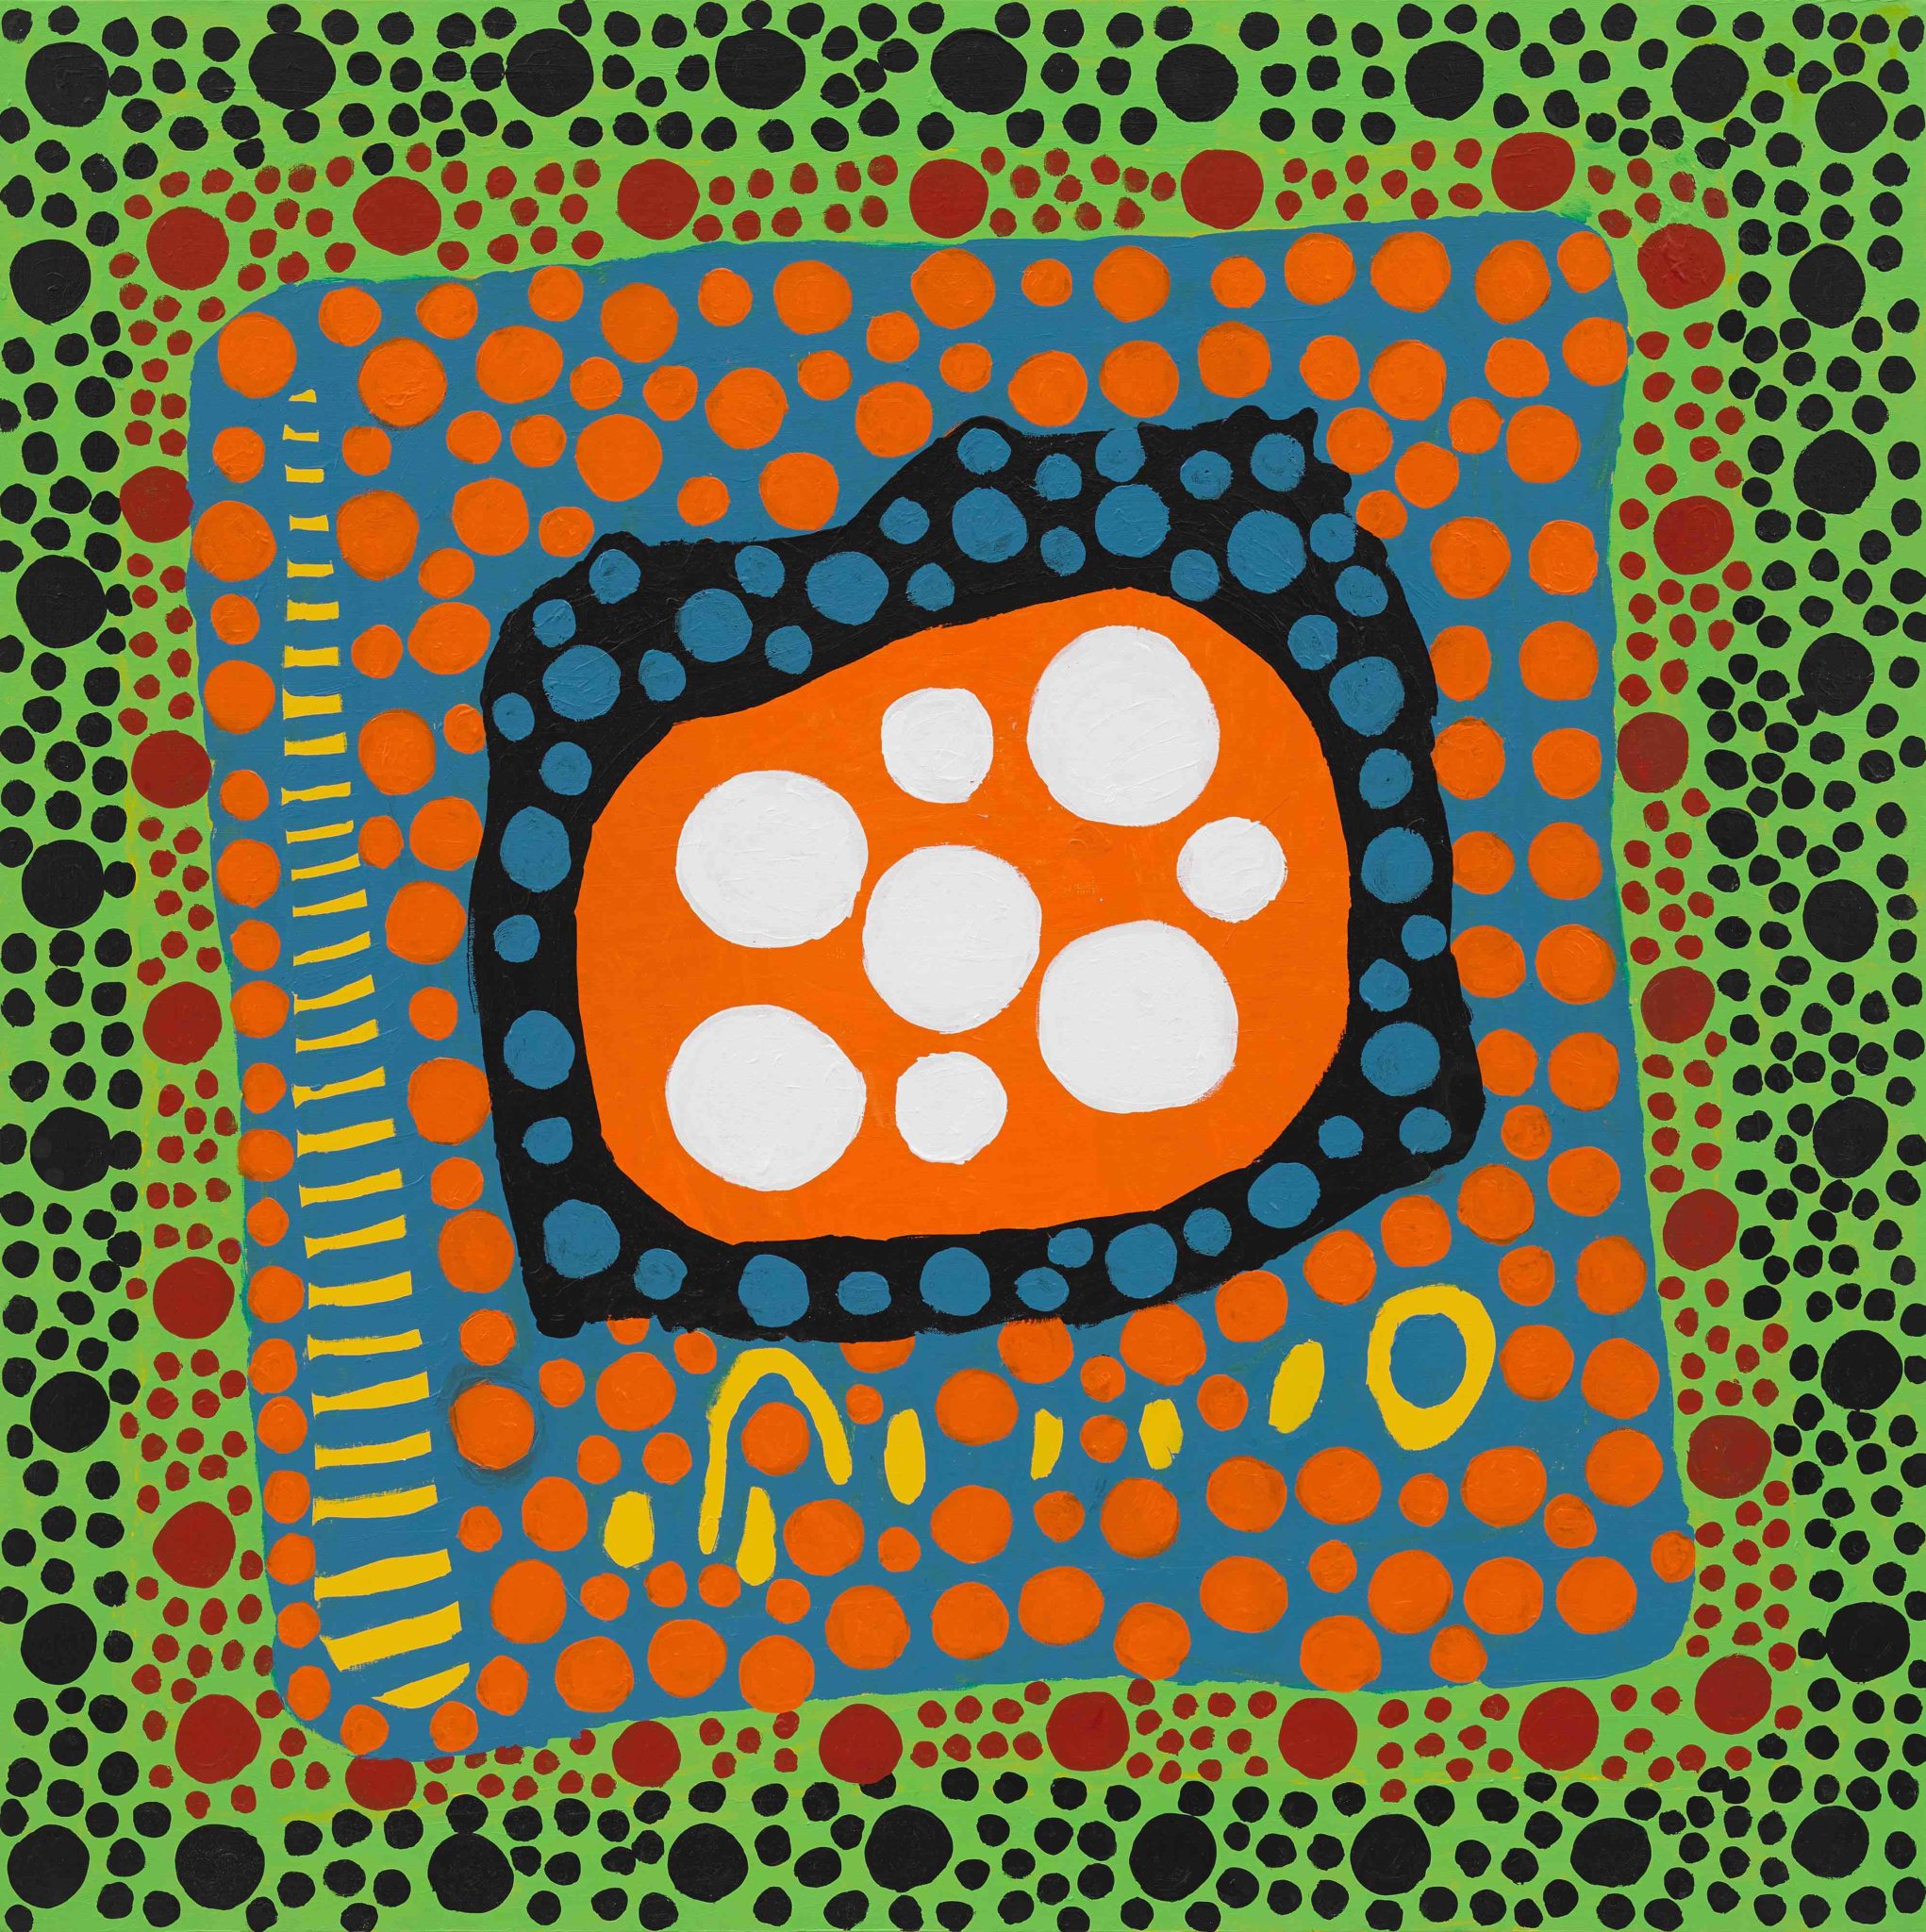 Yayoi Kusama: I Want Your Tears to Flow with the Words I Wrote [London]